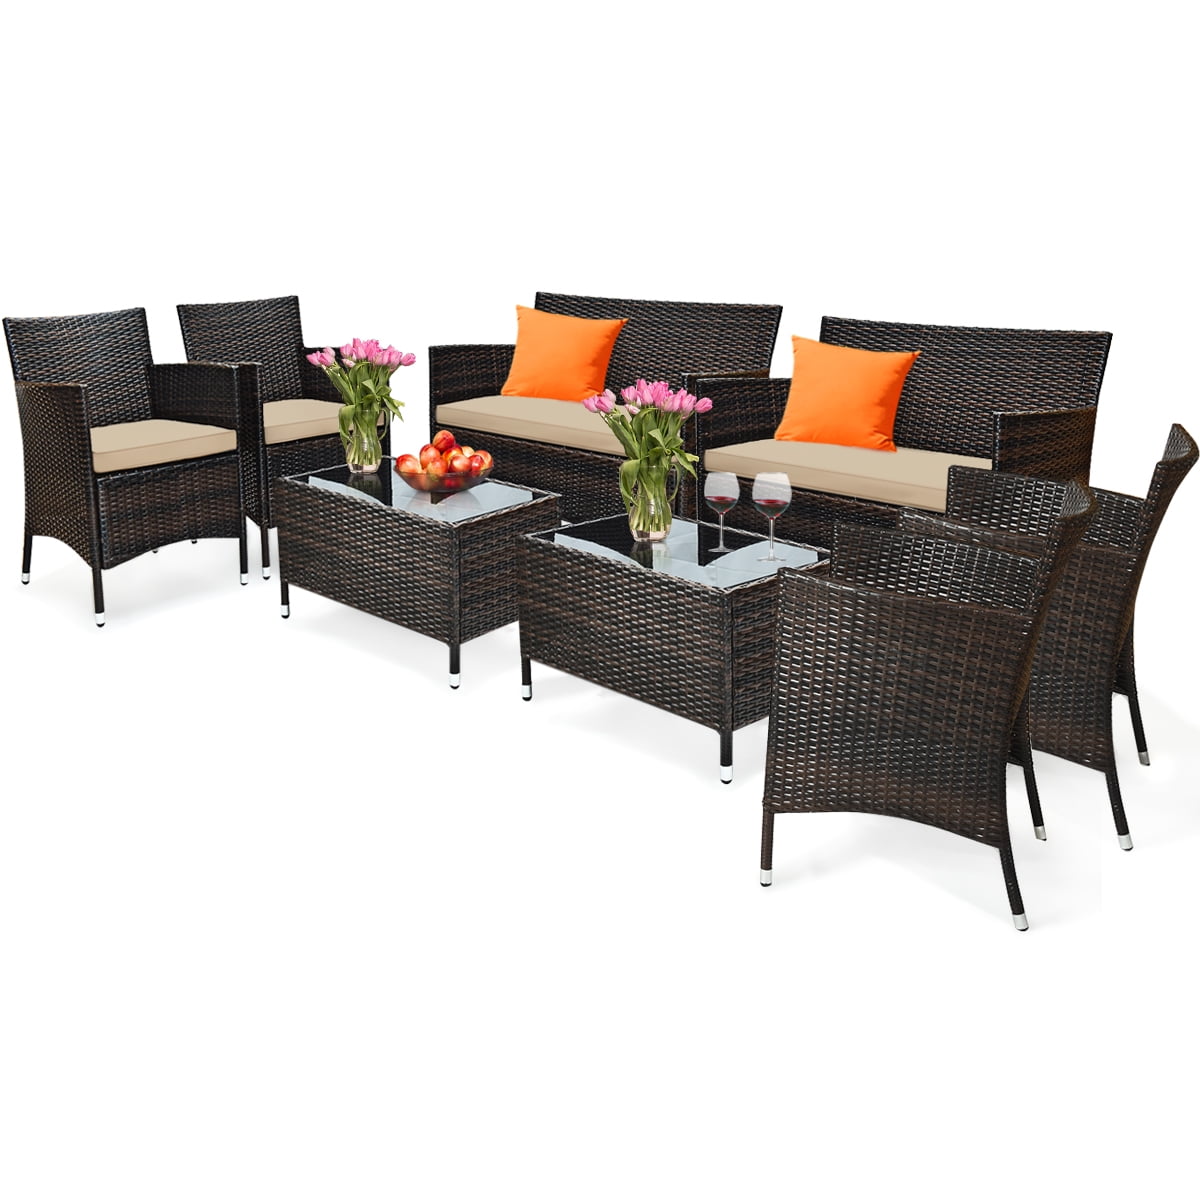 Black Bistro Sets with Coffee Table for Courtyard Balcony Garden Wicker Chairs with Soft Cushion and Table with Tempered Glass Outdoor Rattan Sofas with Tempered Glass Coffee Table DORTALA 4-Piece Patio Wicker Conversation Furniture Set